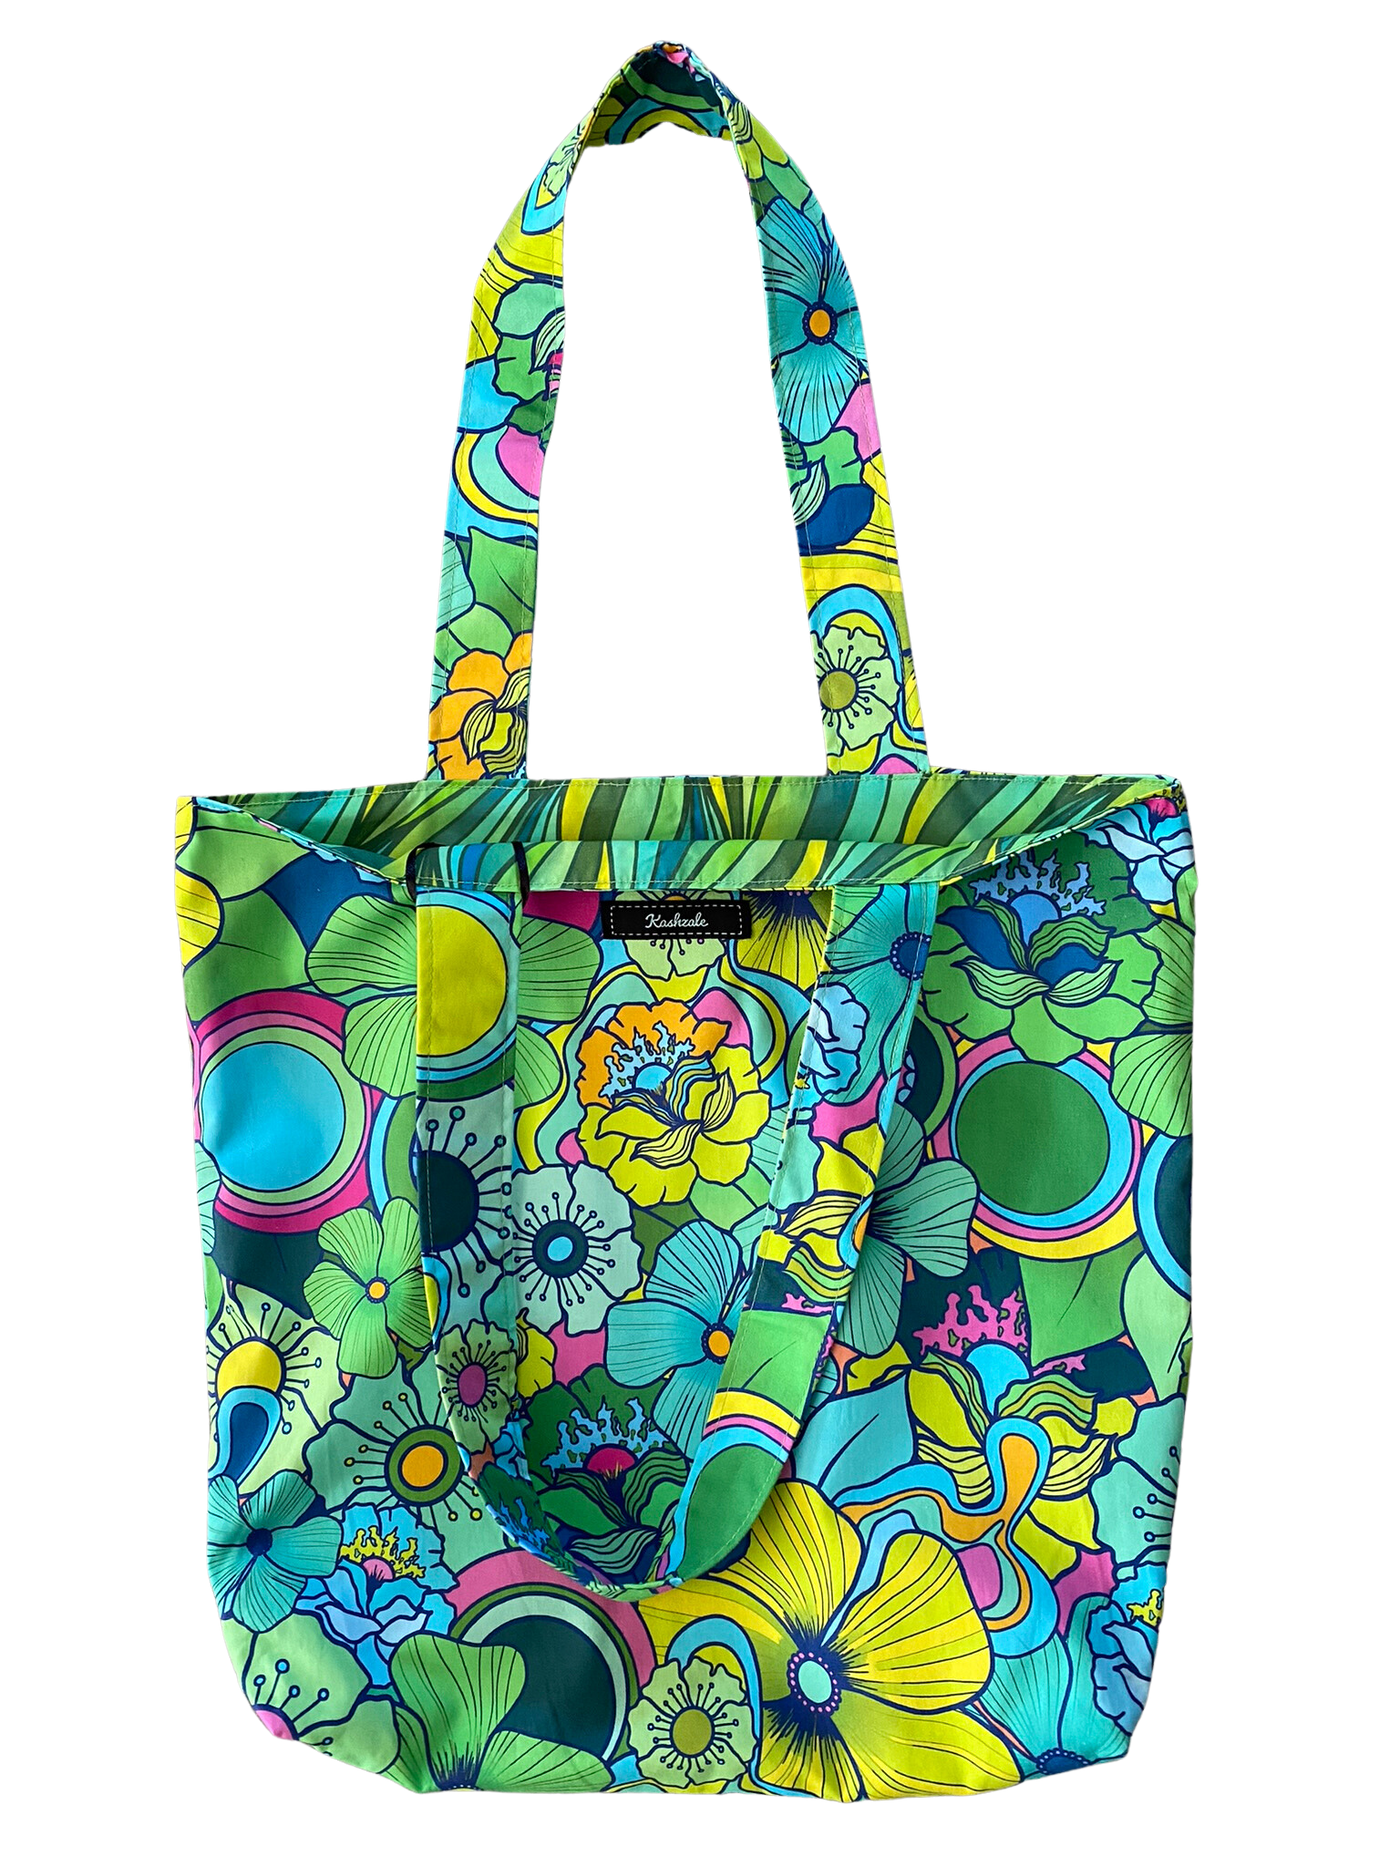 70's Floral Green Tote Bag